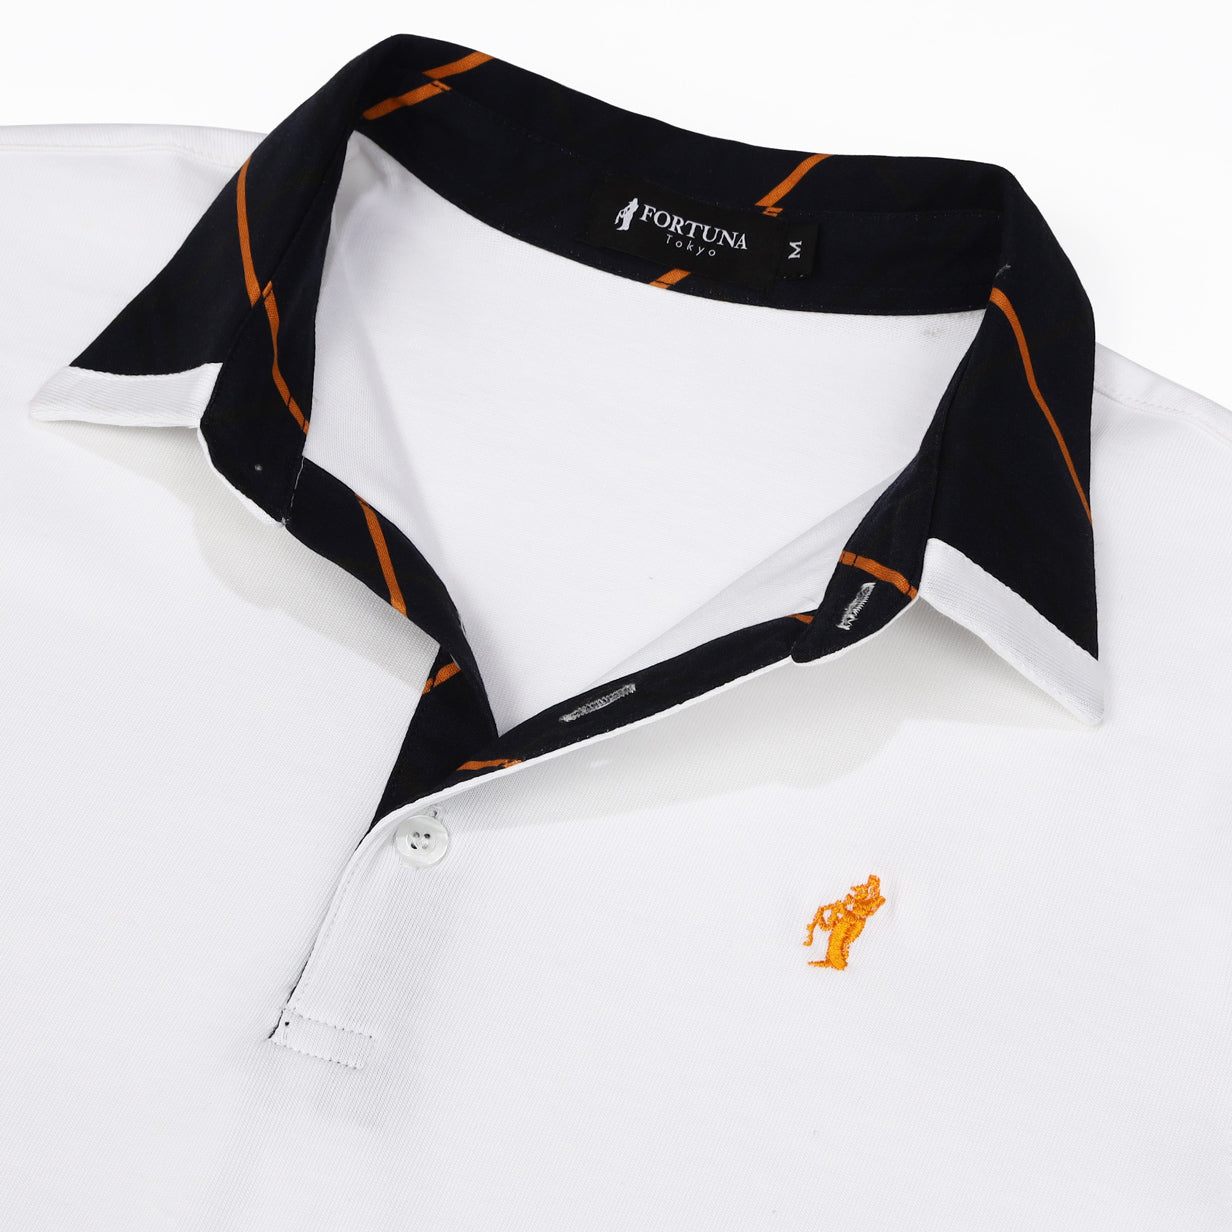 Polo shirt men's 05. Chance plaid with logo embroidery short sleeve FORTUNA Tokyo